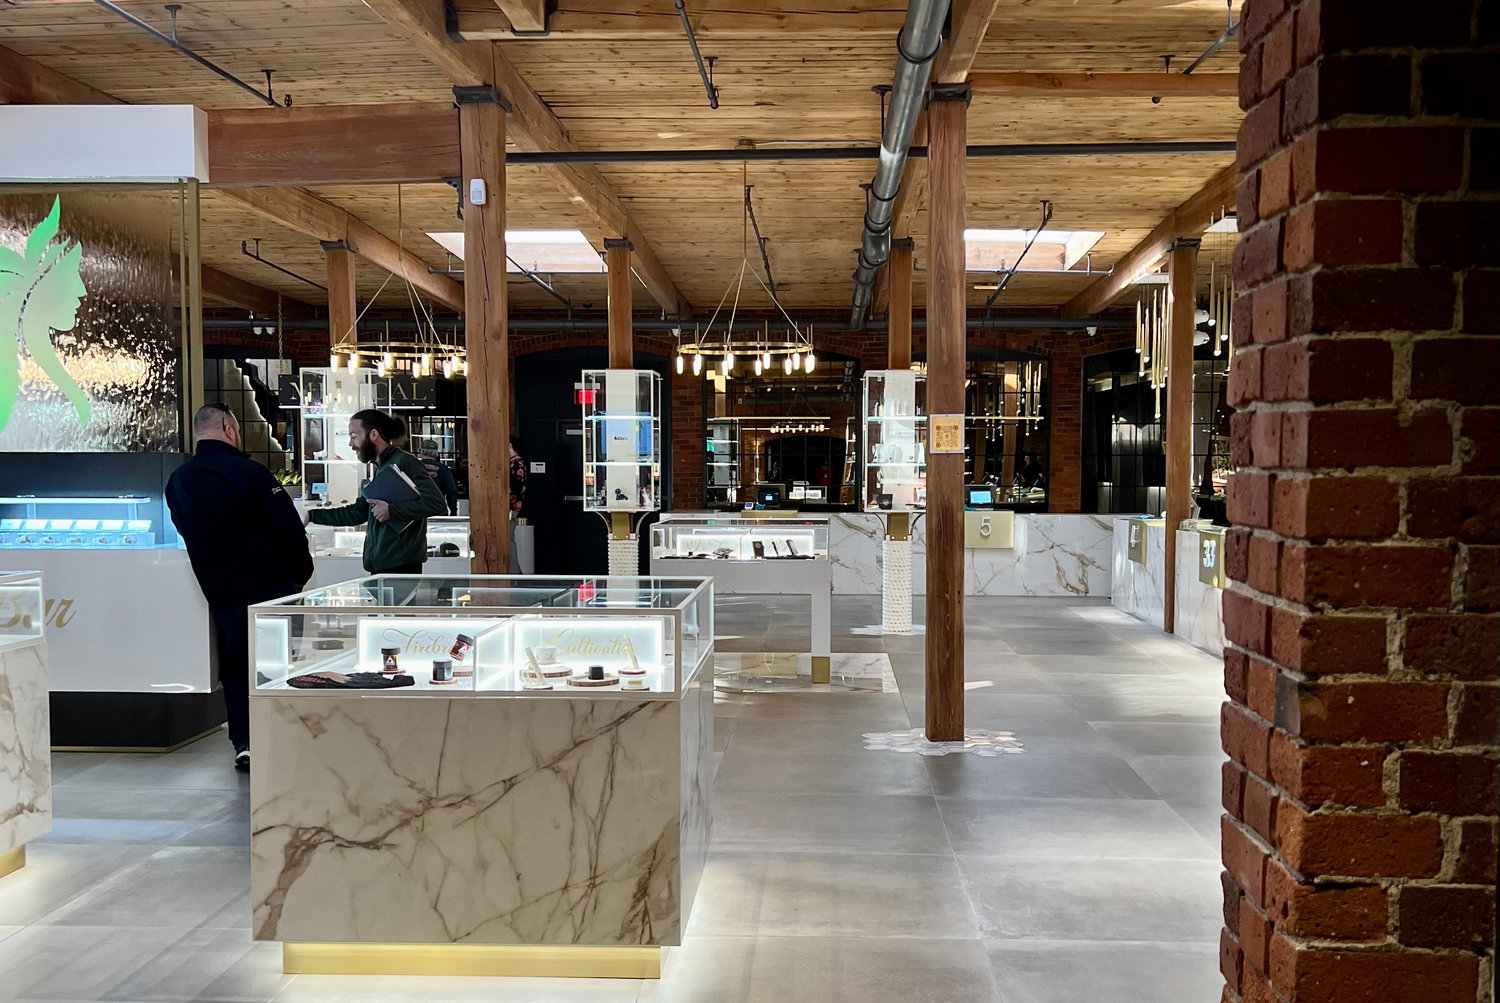 Mother Earth Wellness offers a boutique cannabis experience in Pawtucket